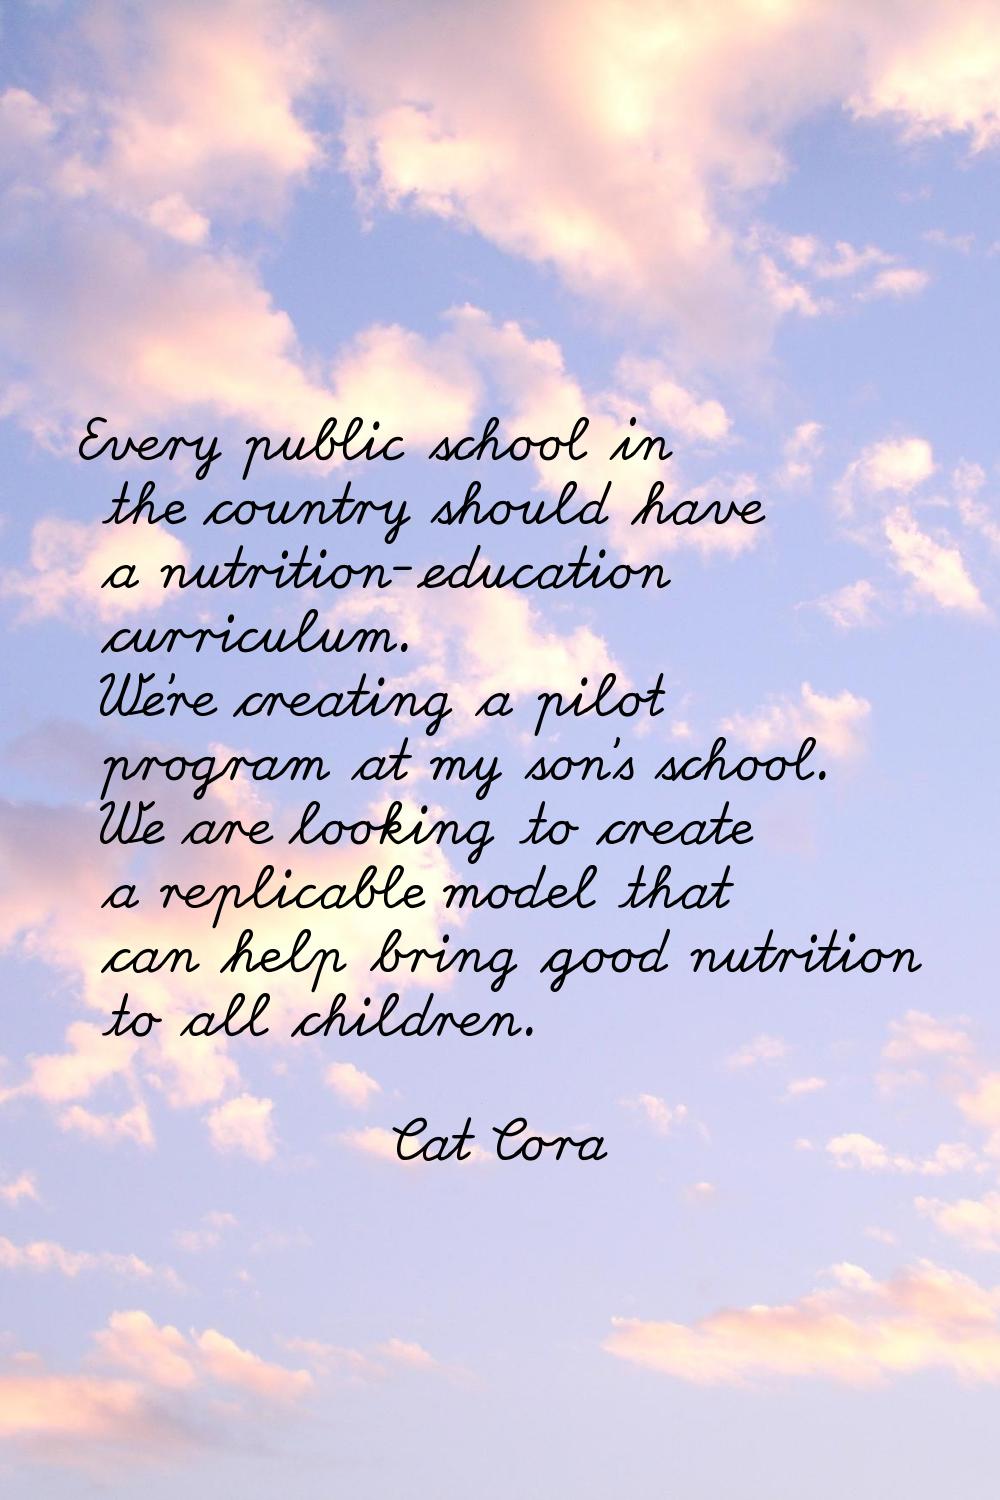 Every public school in the country should have a nutrition-education curriculum. We're creating a p